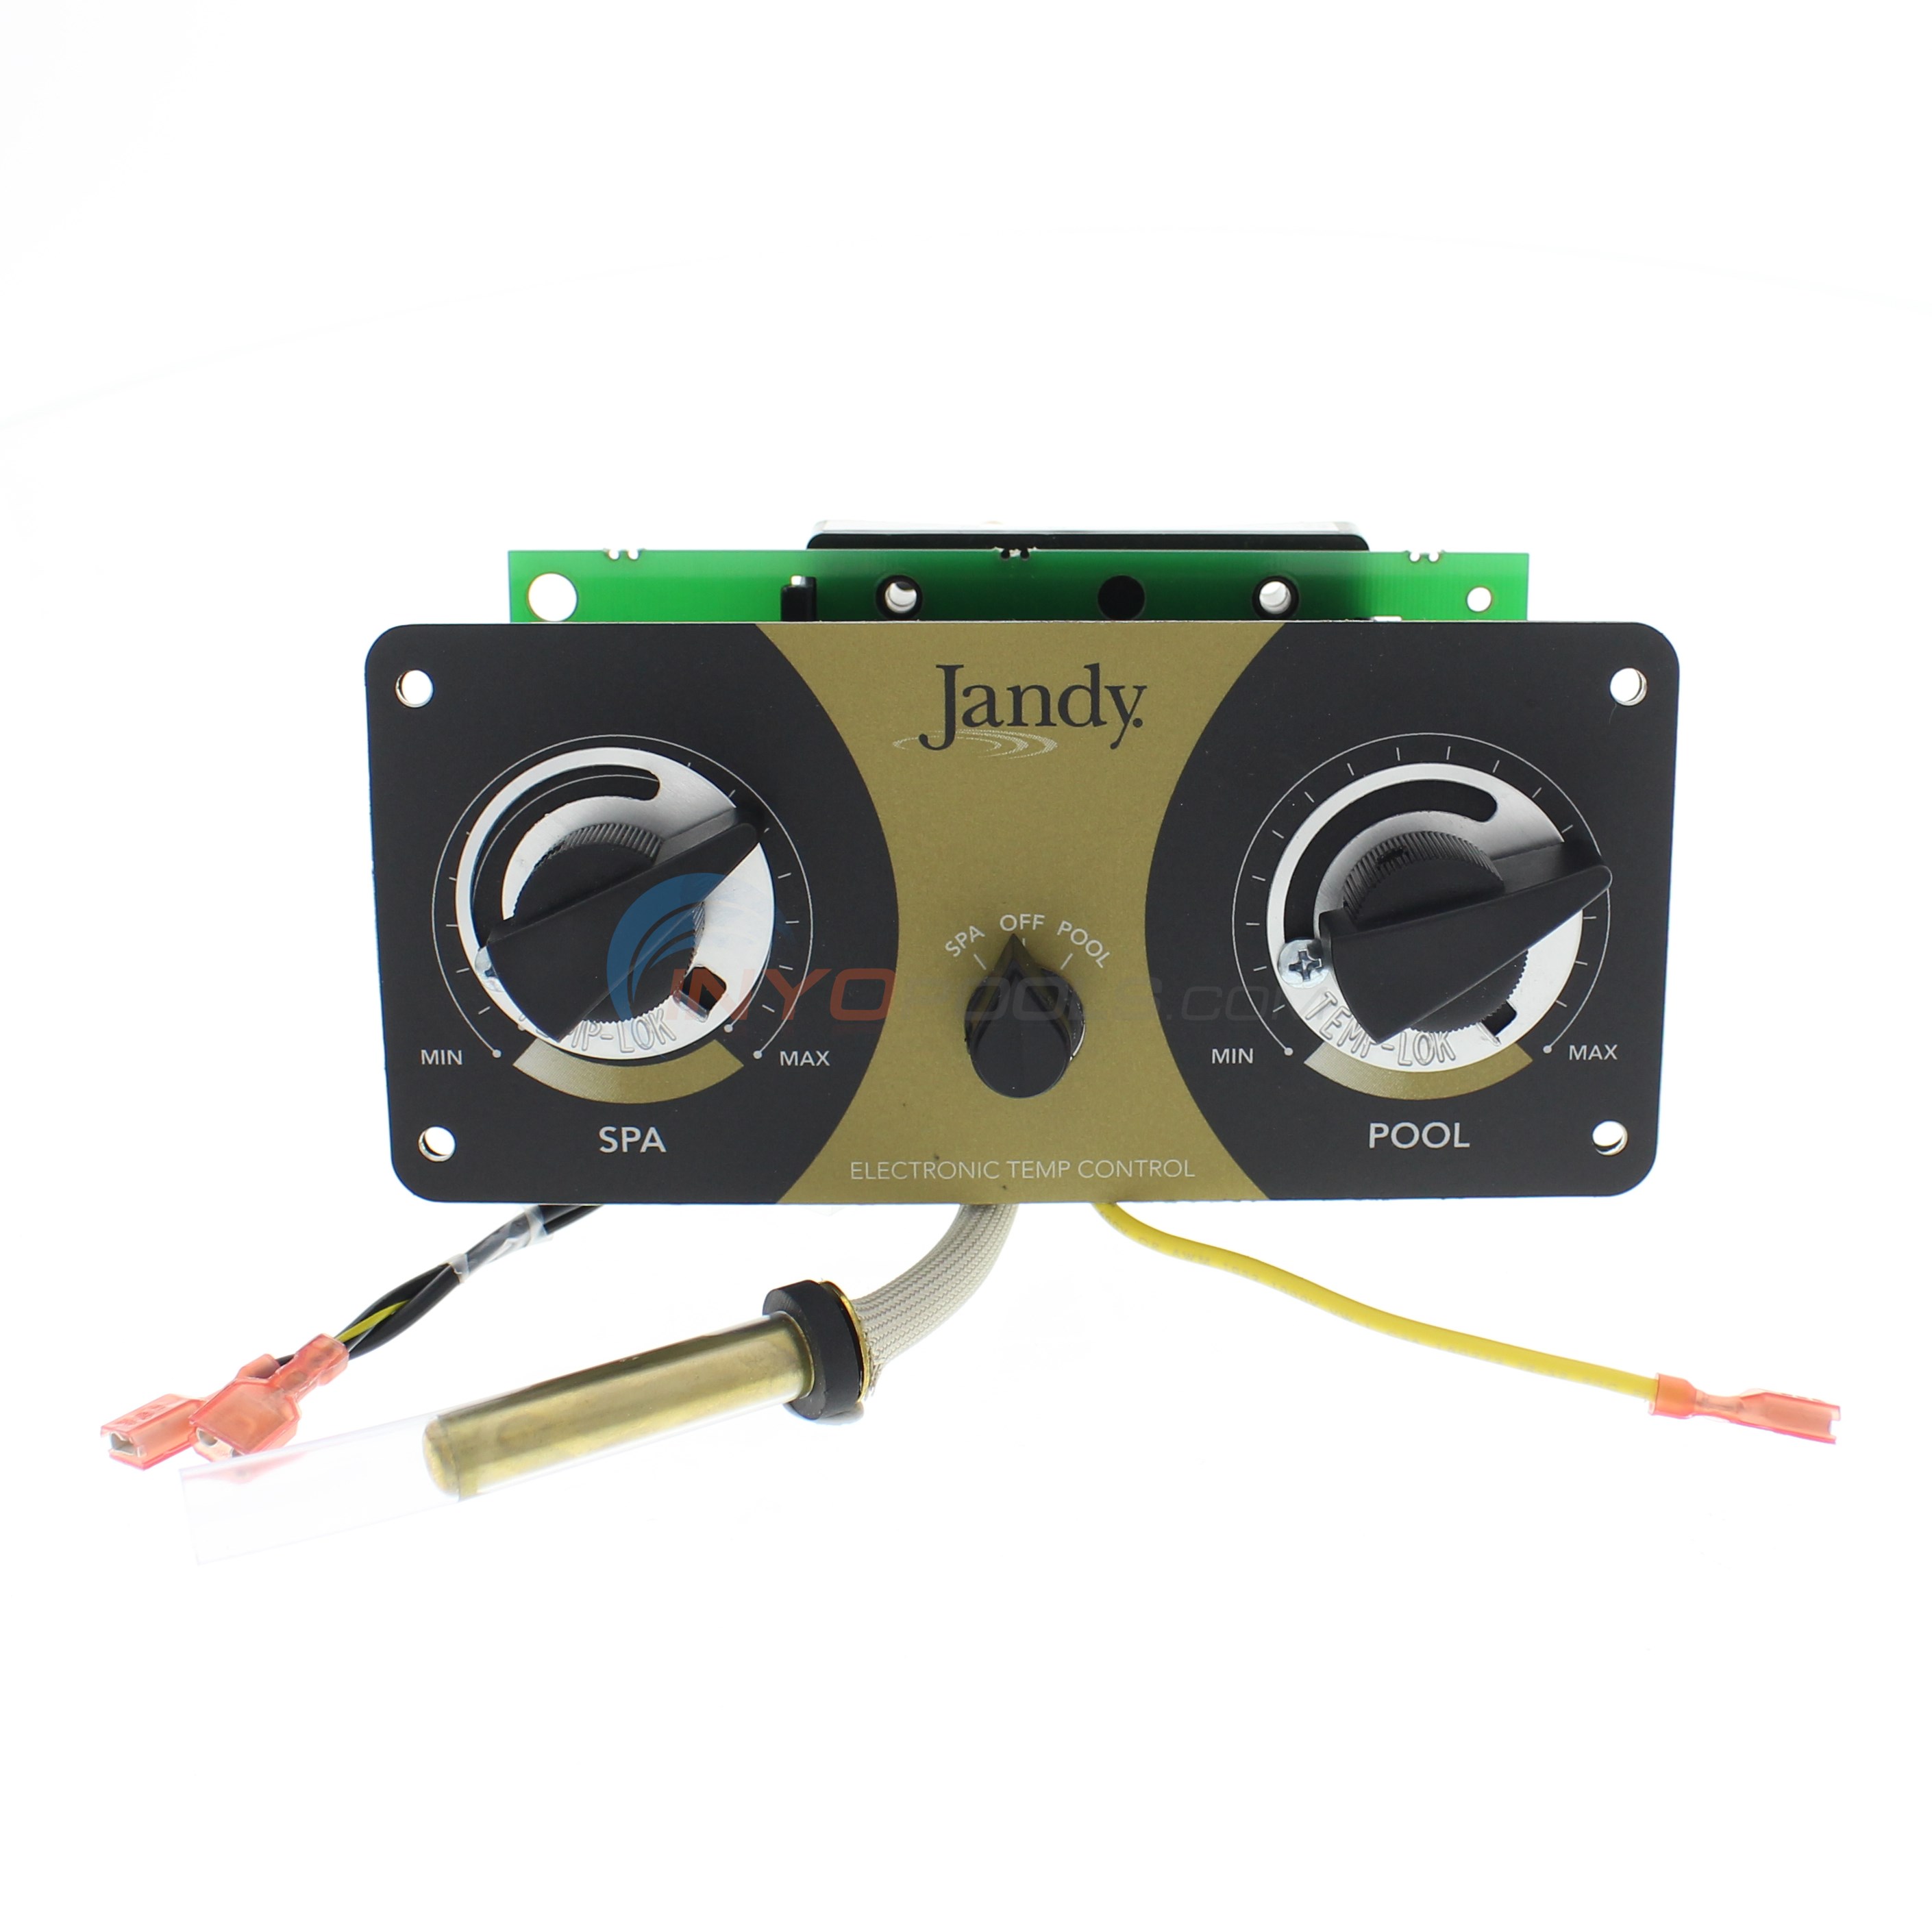 Jandy Zodiac Laars R0011700 Electronic Heater Temperature Control Assembly